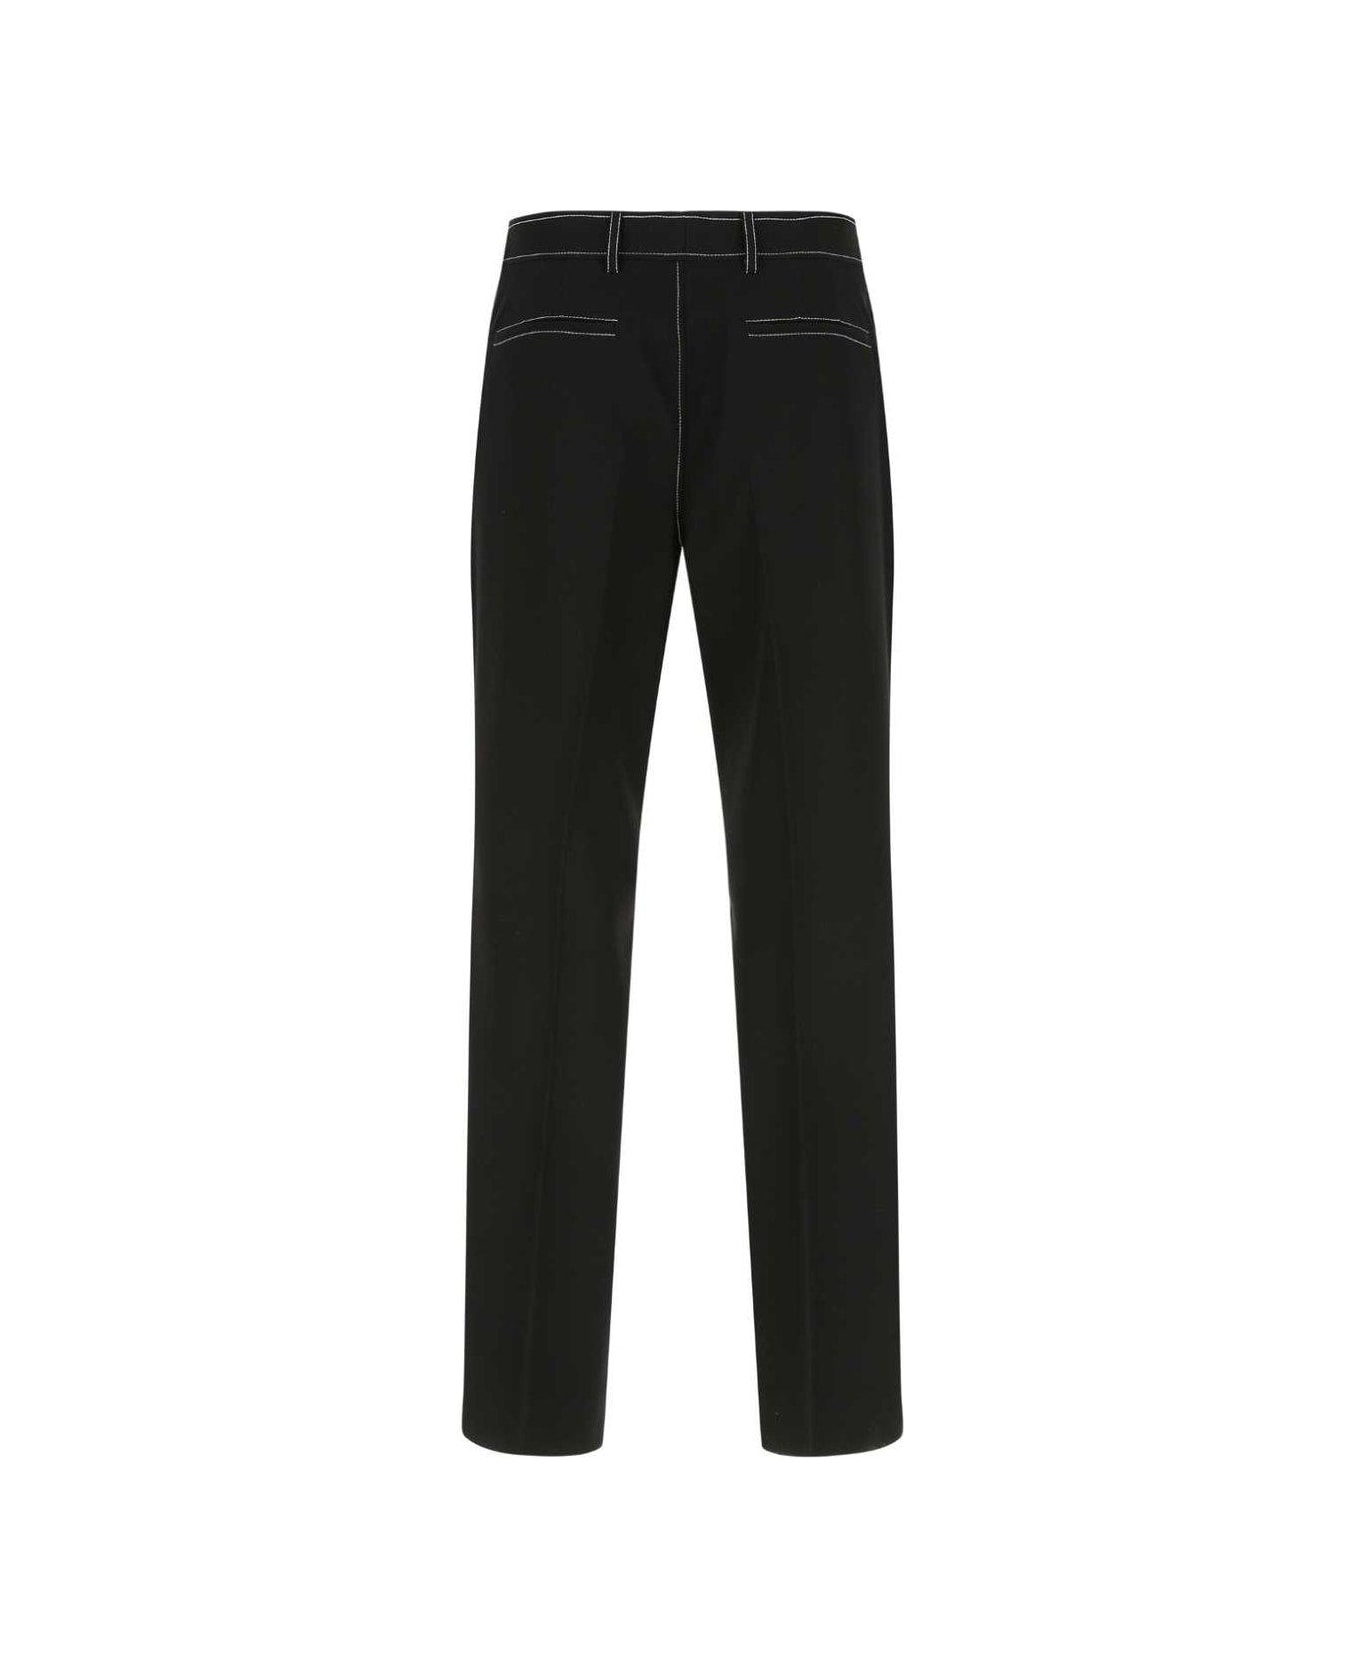 Burberry Straight-leg Tailored Trousers - BLACK ボトムス